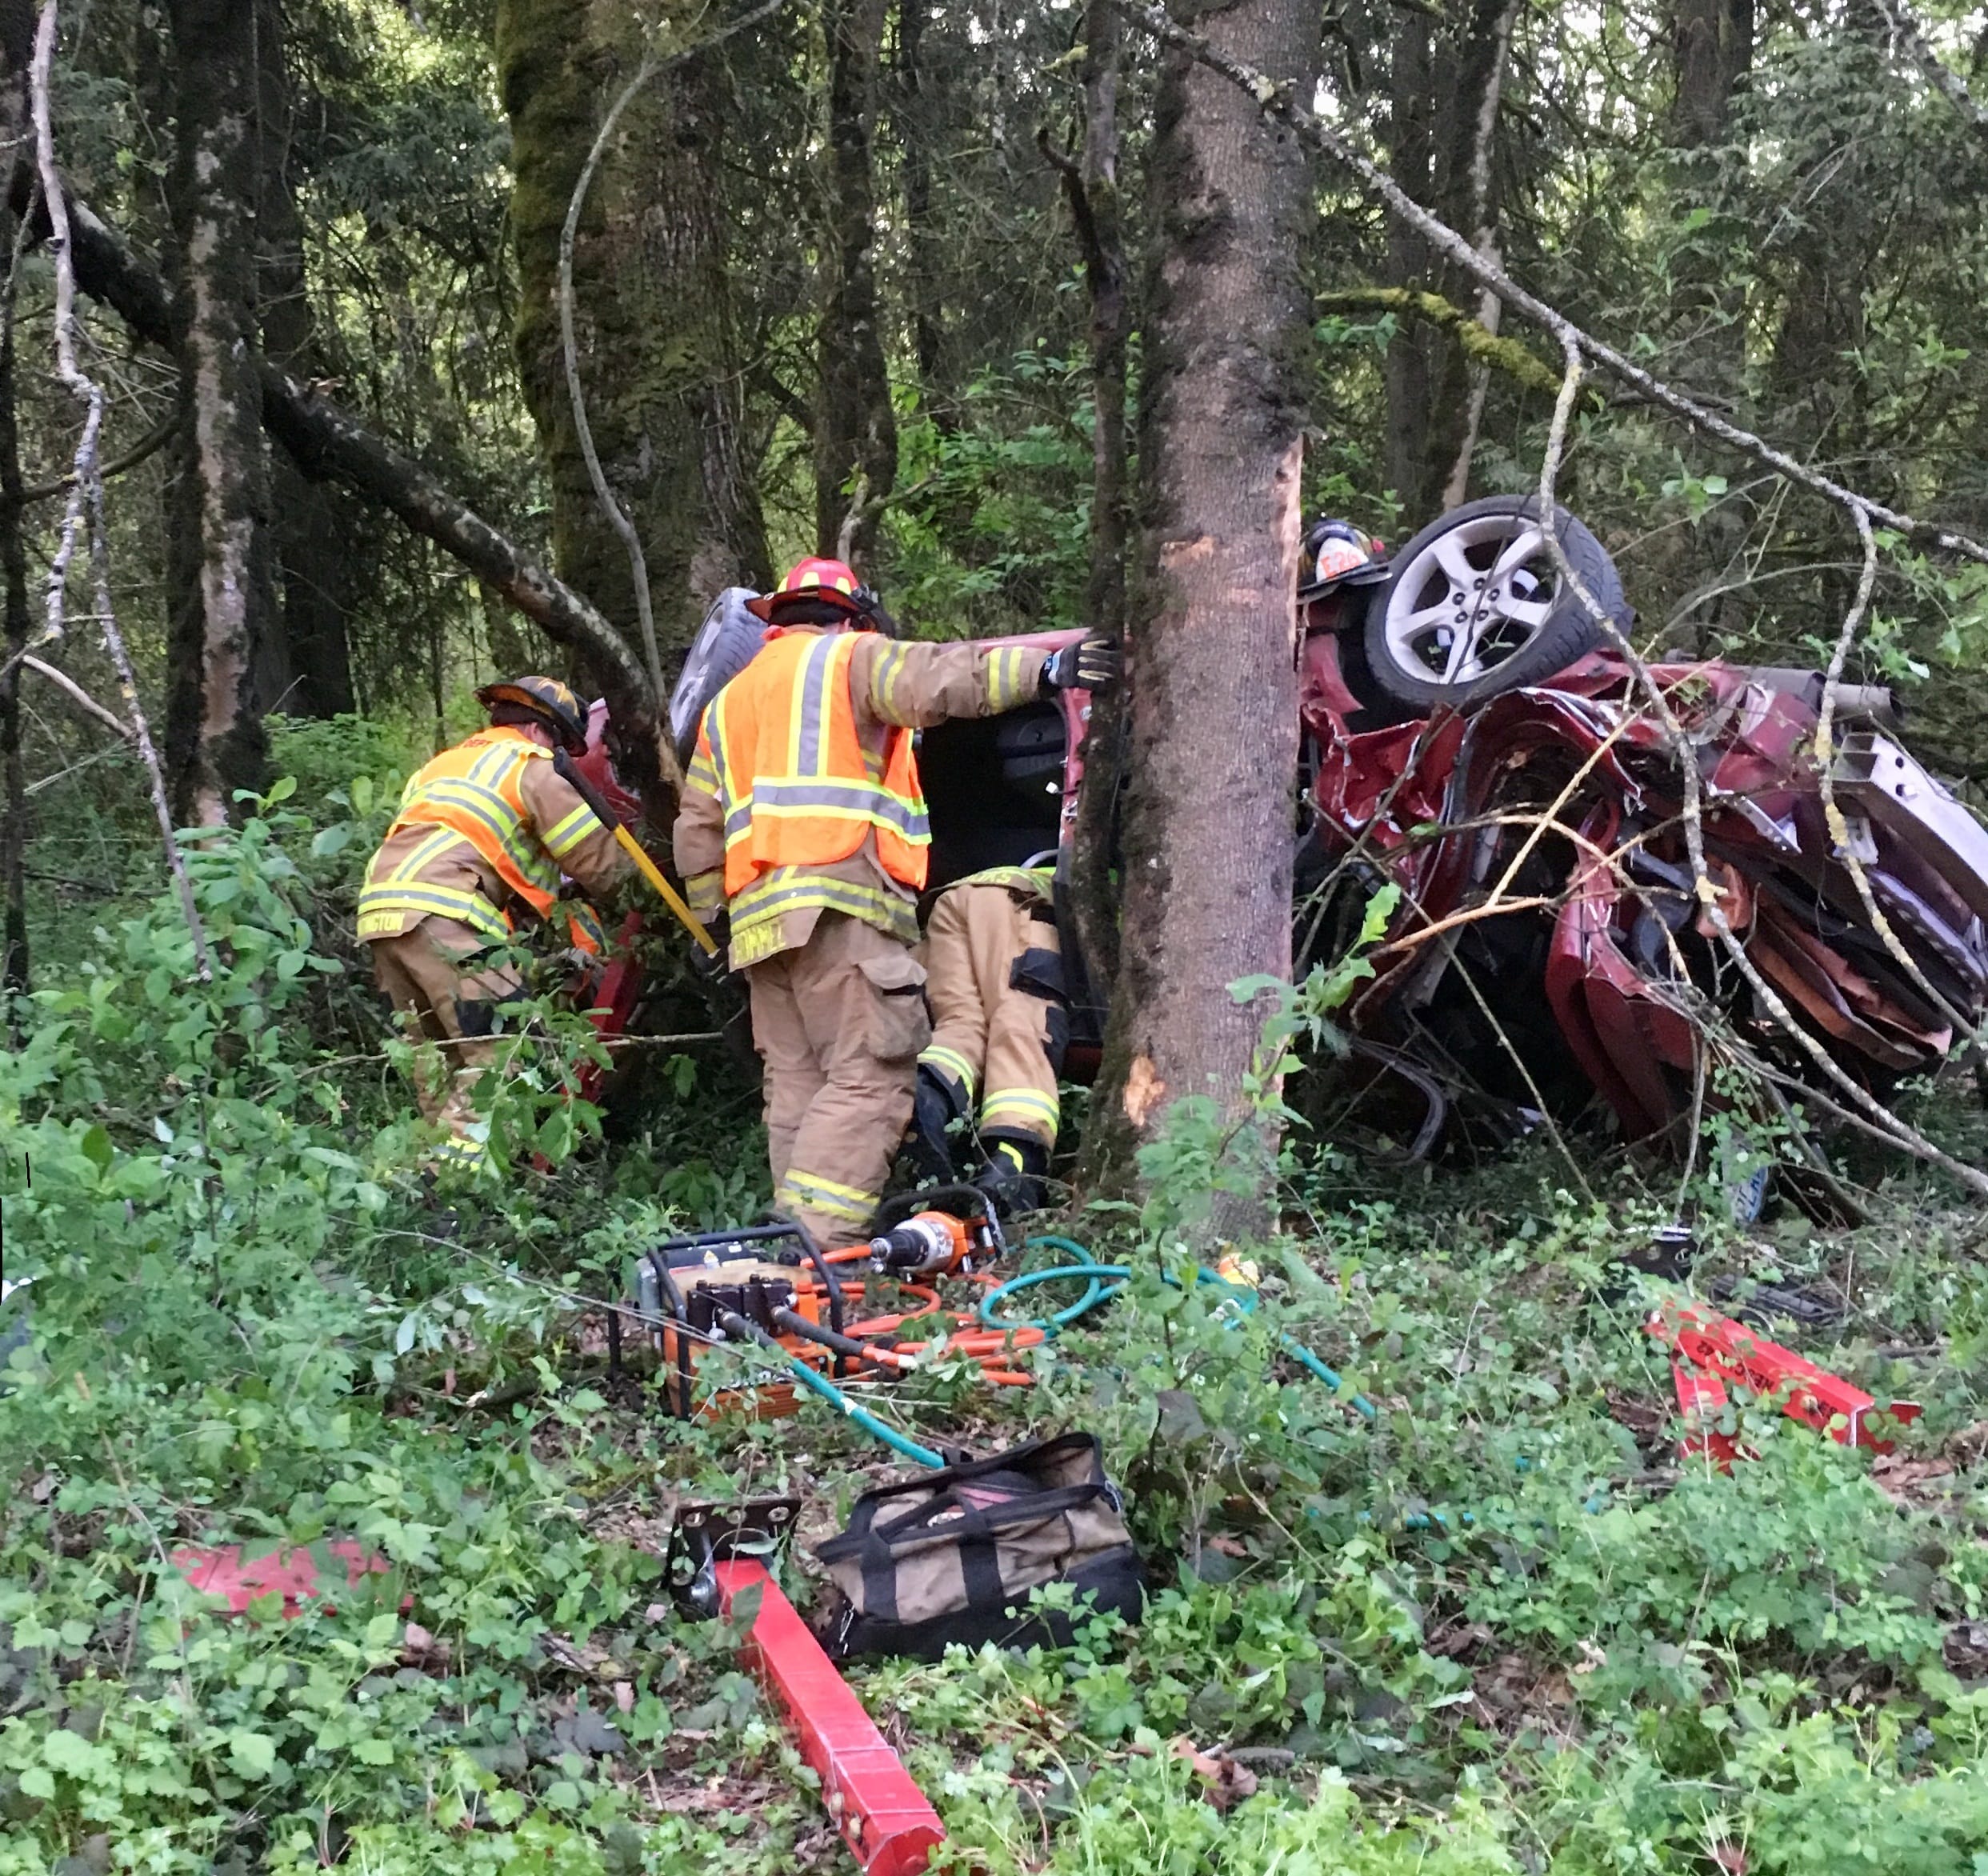 Firefighters with Clark County Fire & Rescue had to carefully remove a man who was pinned in his car after veering off I-5 and crashing into a tree.